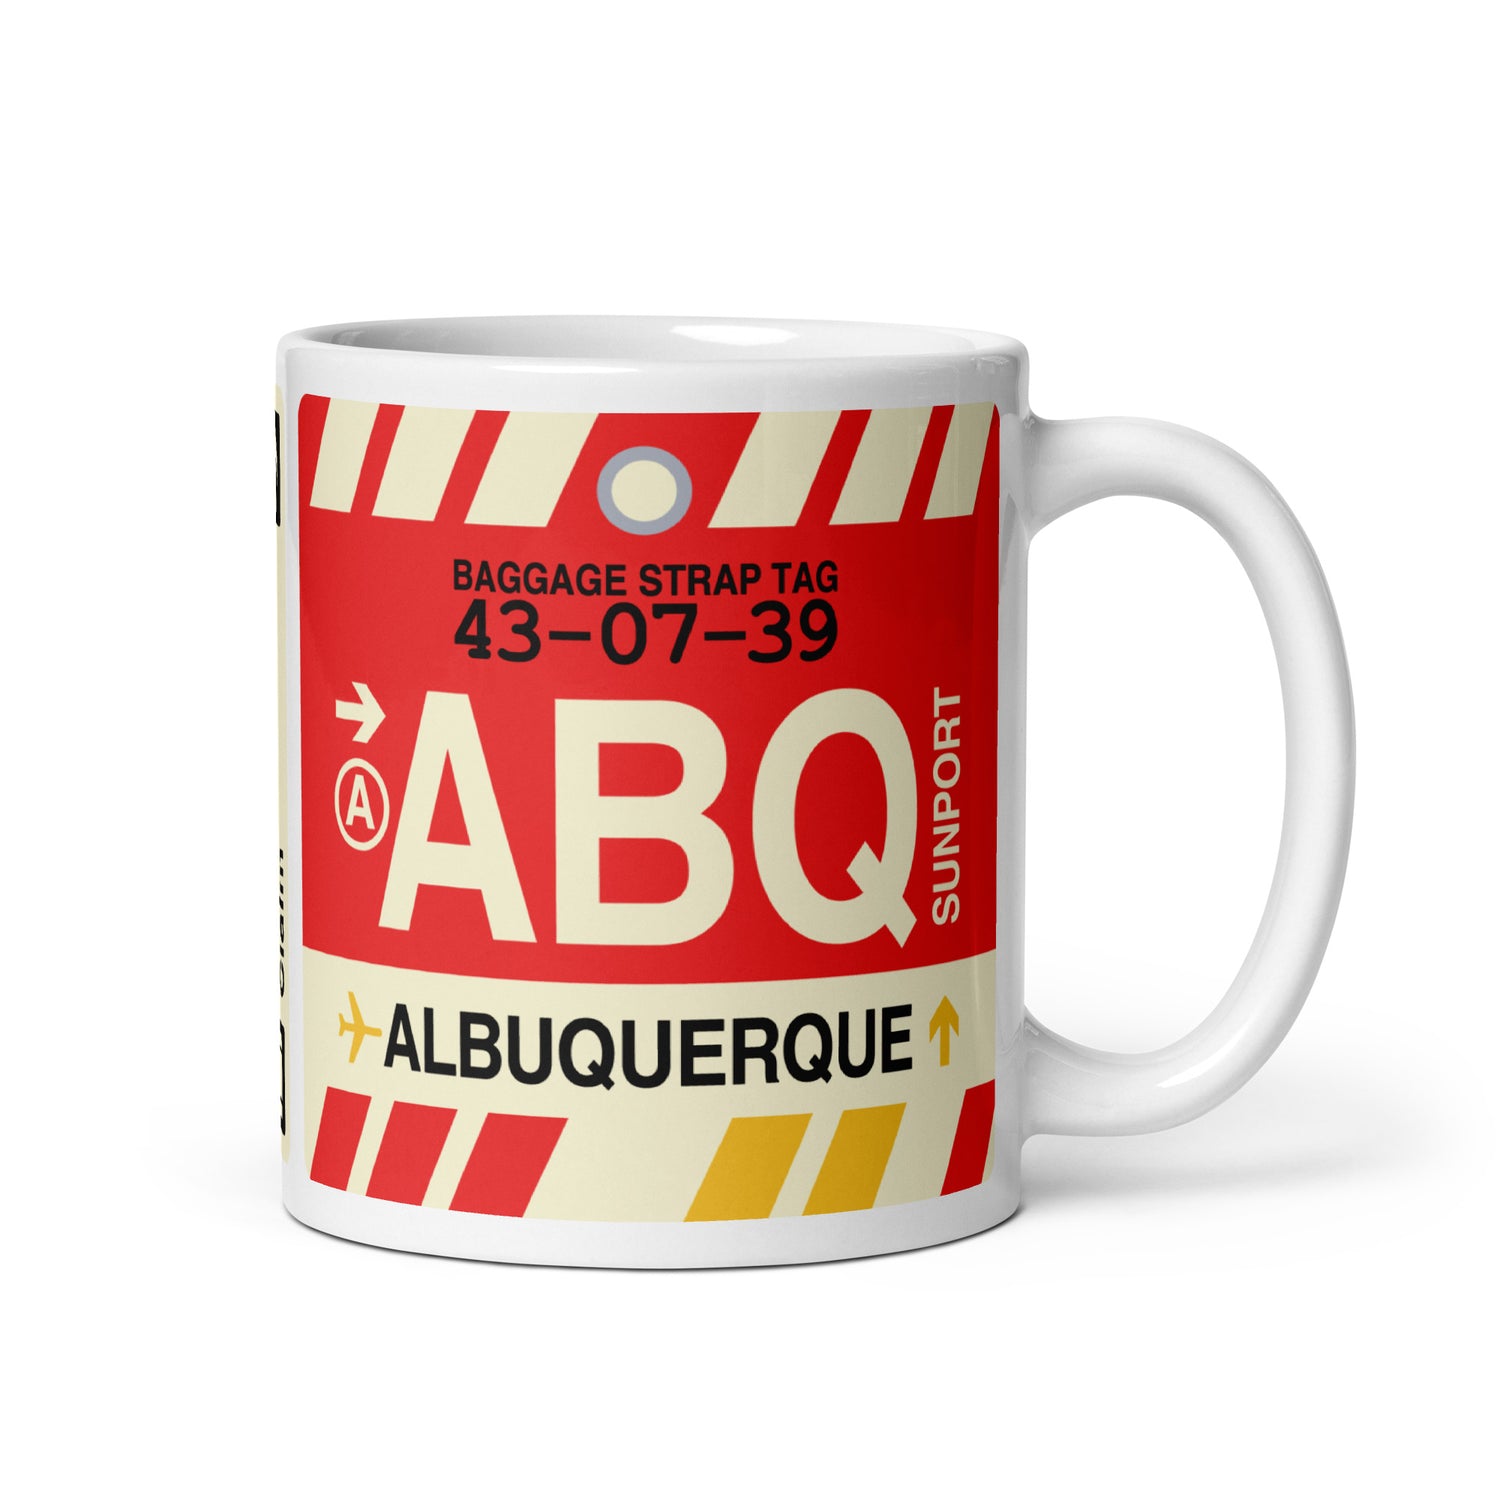 Albuquerque New Mexico Coffee Mugs and Water Bottles • ABQ Airport Code